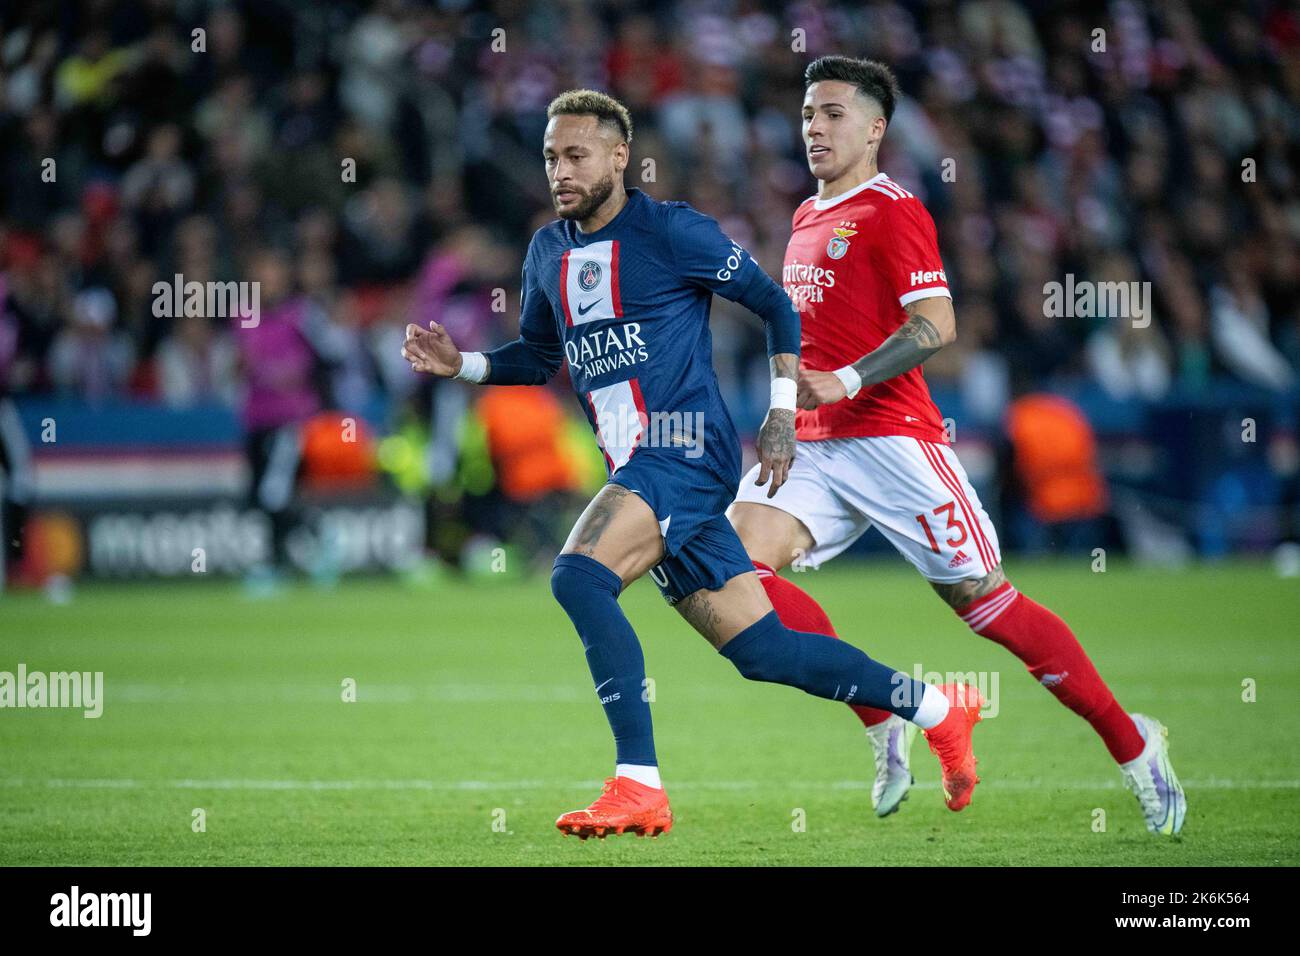 PARIS, FRANCE - OCTOBER 11: Neymar of Paris Saint-Germain and Enzo Fernandez of SL Benfica in action during the UEFA Champions League group H match be Stock Photo